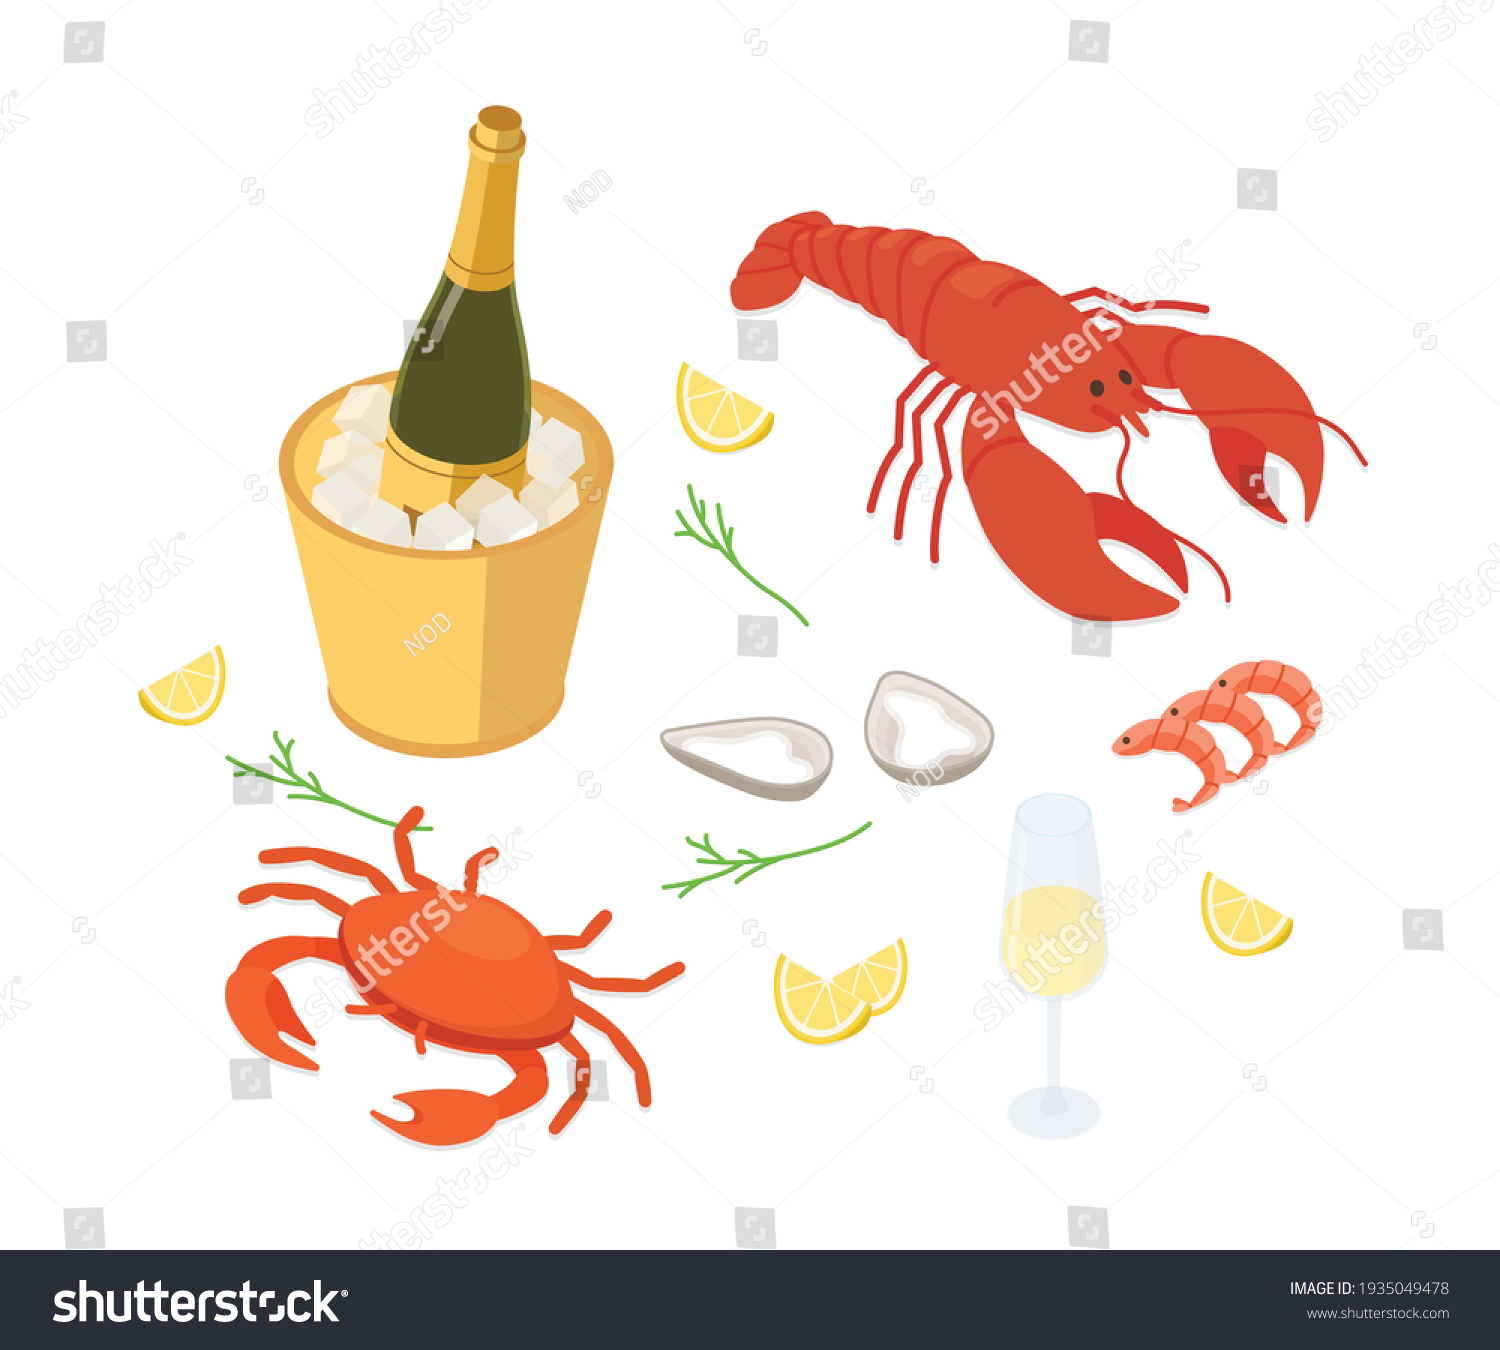 SVG of Seafood set - lobster, oysters and sparkling wine. Isometric vector illustration in flat design.
 svg